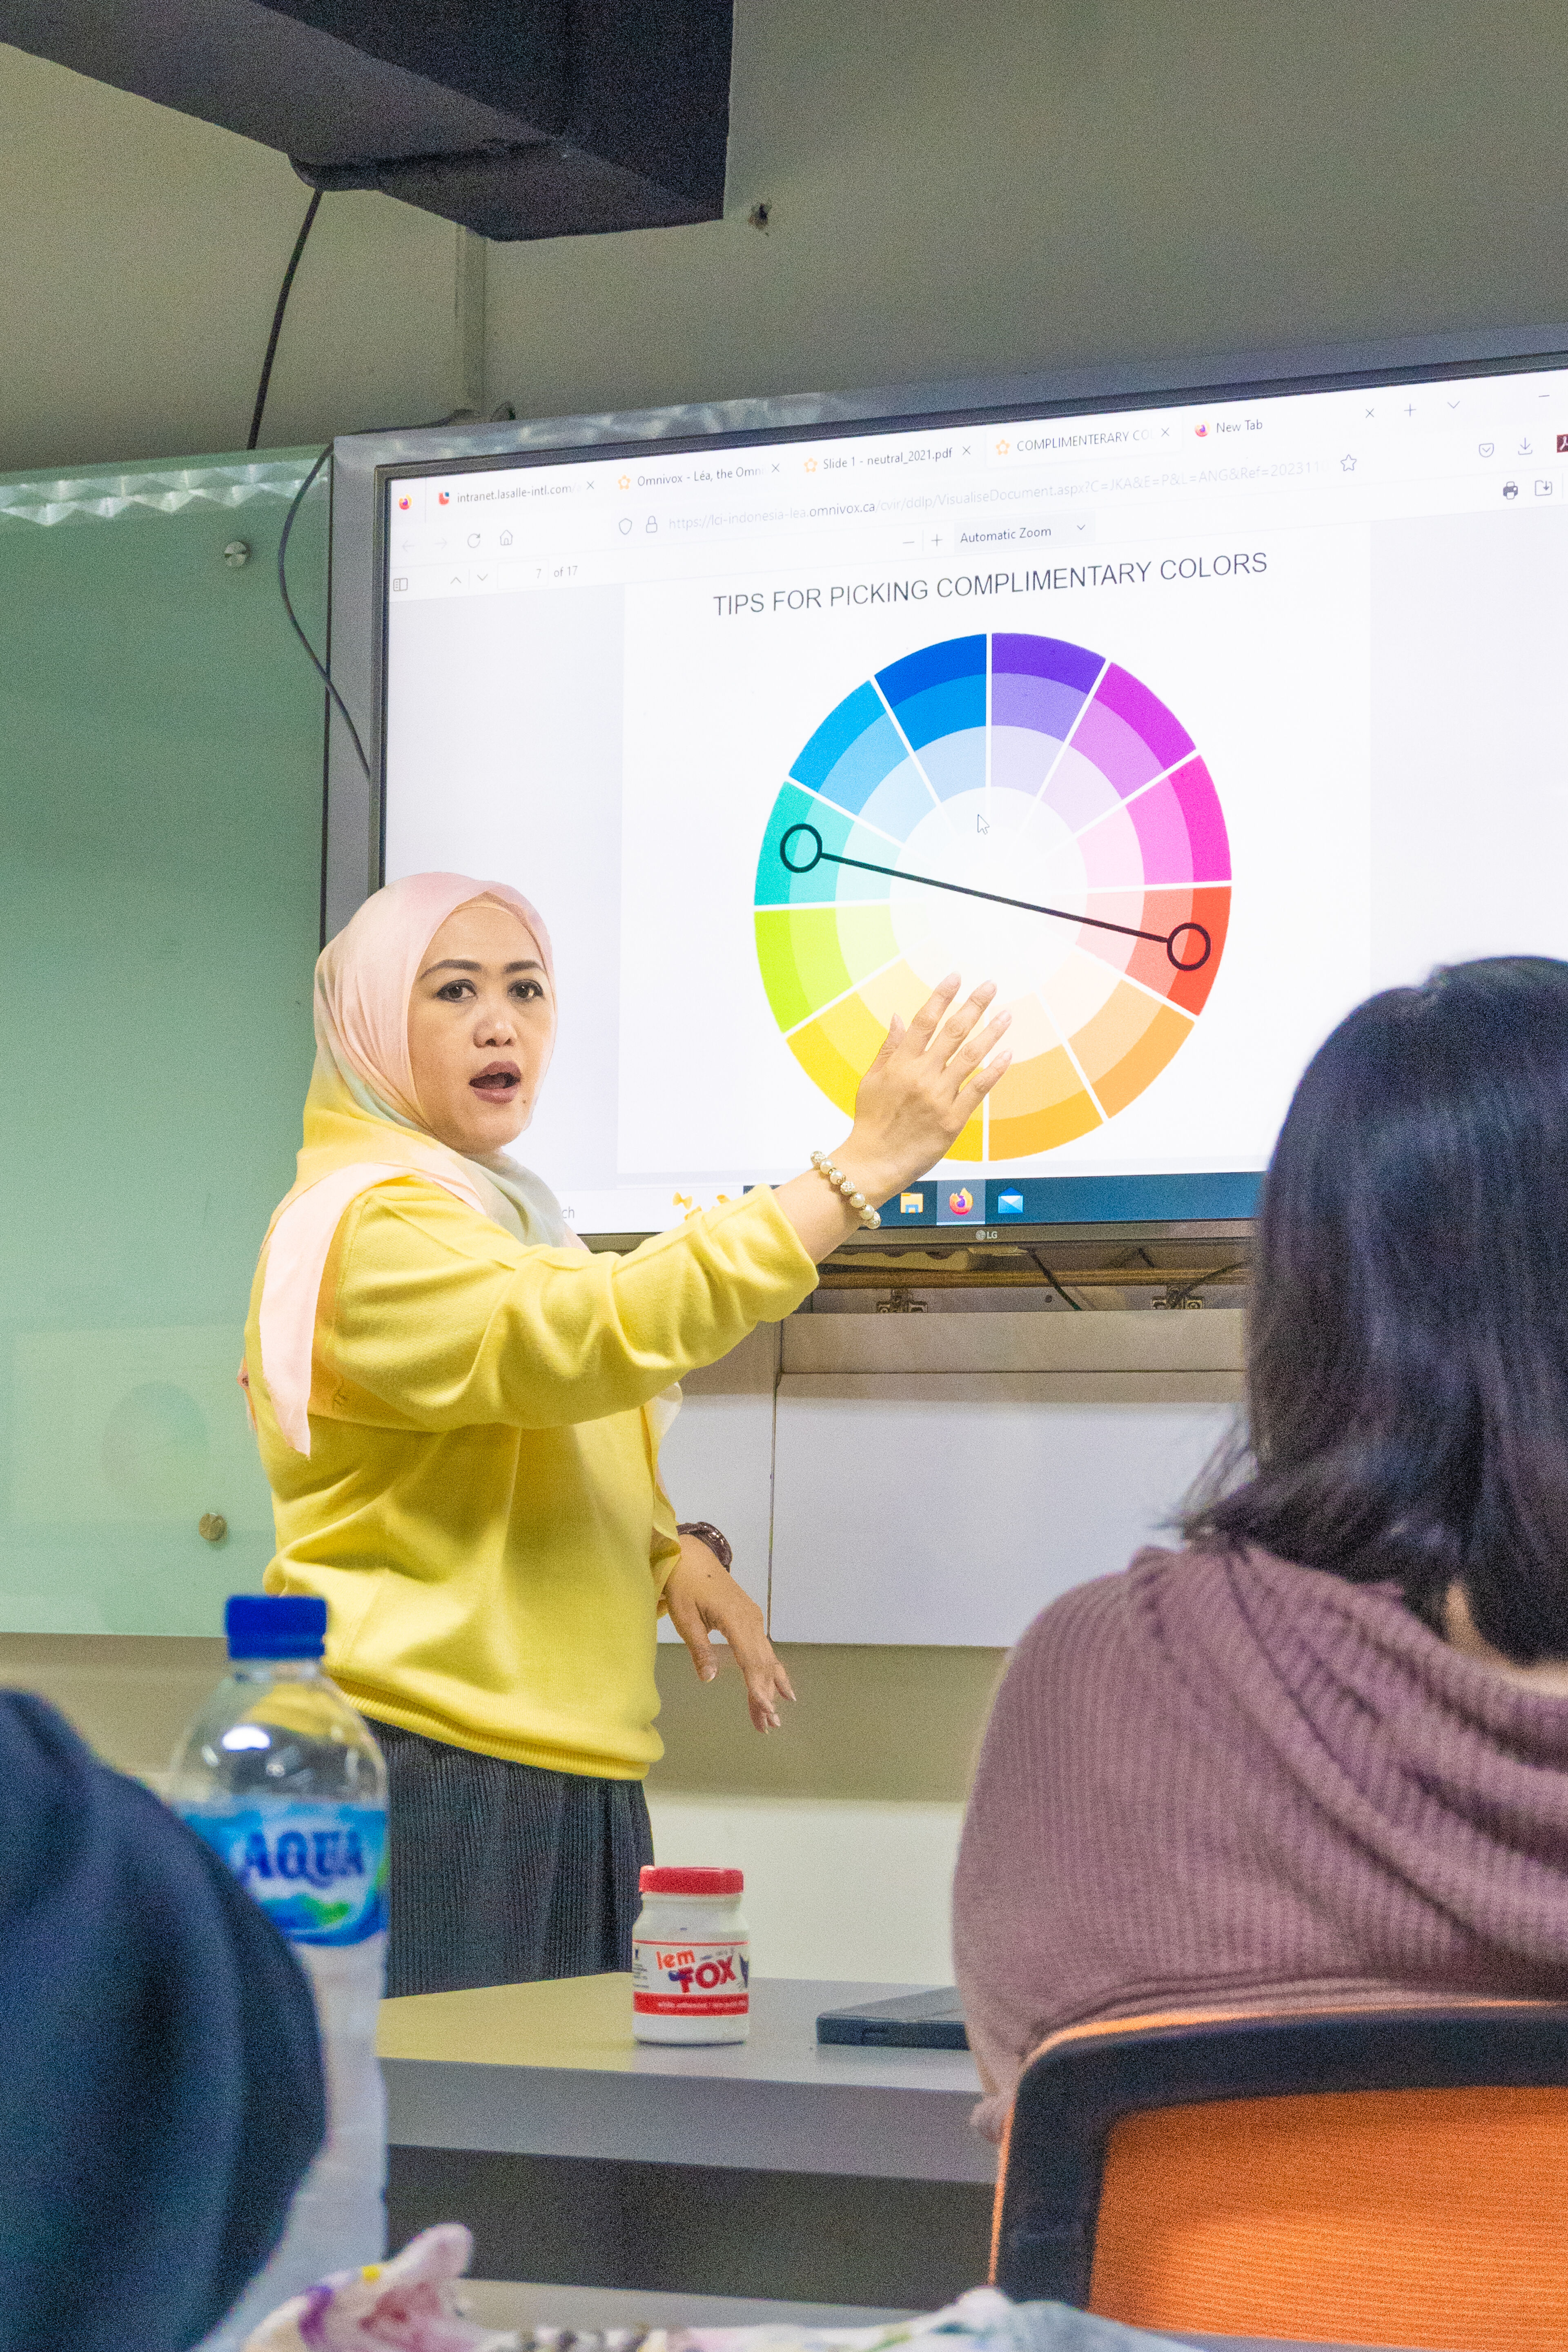 A woman in a hijab presents about complementary colors in a workshop, with a color wheel on the screen.